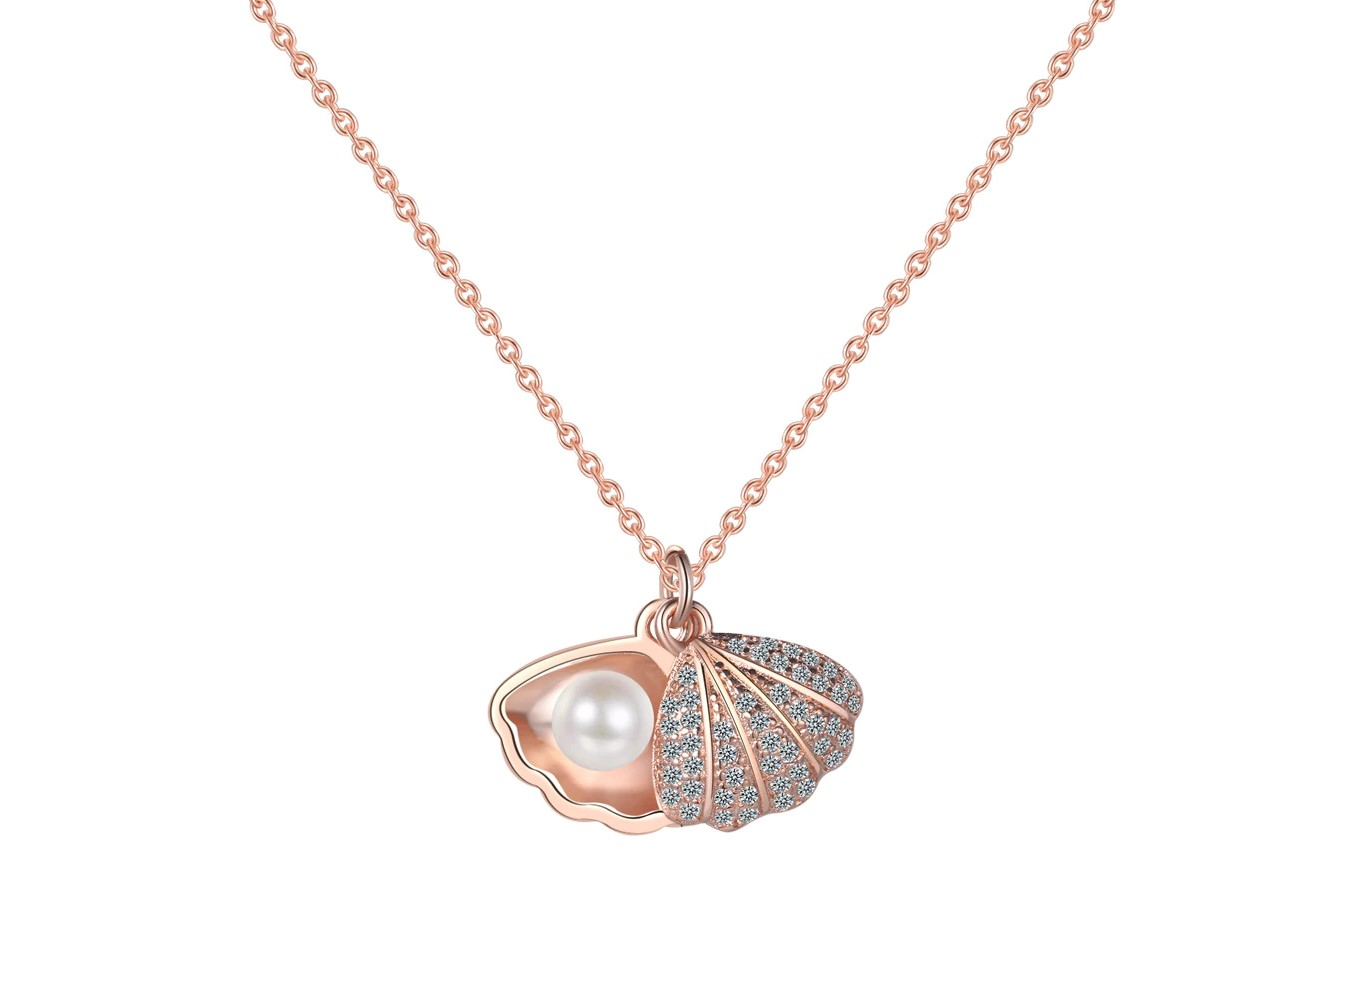 Women's Sterling Silver Oyster Shell Pendant With 18 Inch Chain